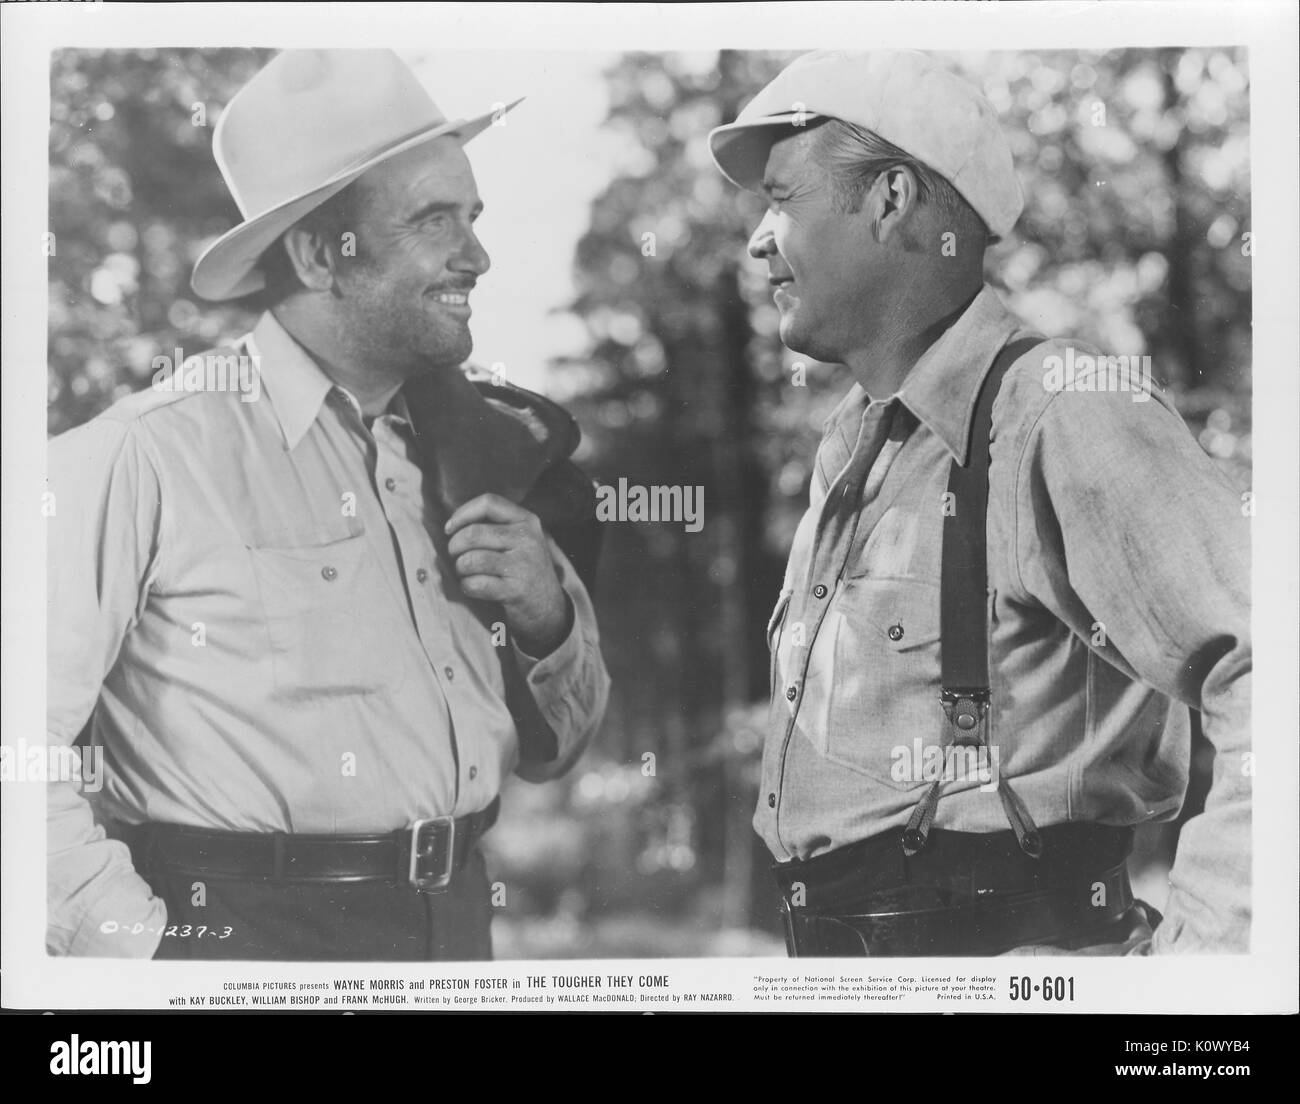 Wayne Morris and Preston Foster in overalls and cowboy hats in a film still from The Tougher They Come, 1935. Photo credit Smith Collection/Gado/Getty Images. Stock Photo